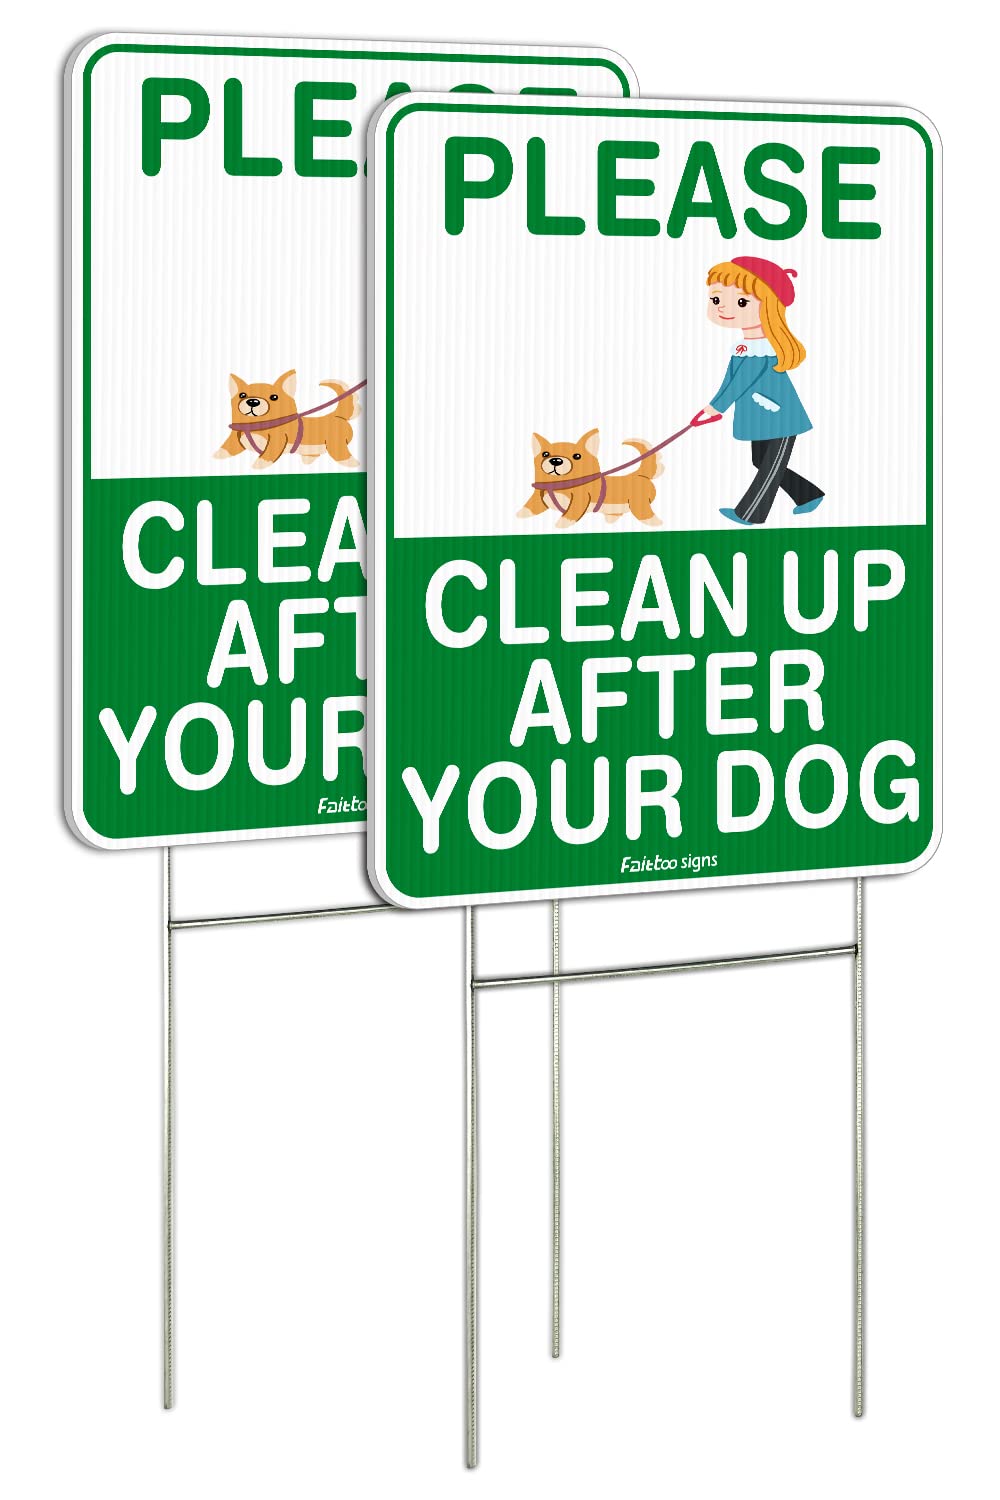 Clean Up After Your Dog Sign, 12 x 9 Clean Up After Your Pets Sign, Double Sided with Metal Wire H-Stakes Stands Corrugated Plastic, Waterproof, Weather Resistant, Easy to Mount, Non-fading